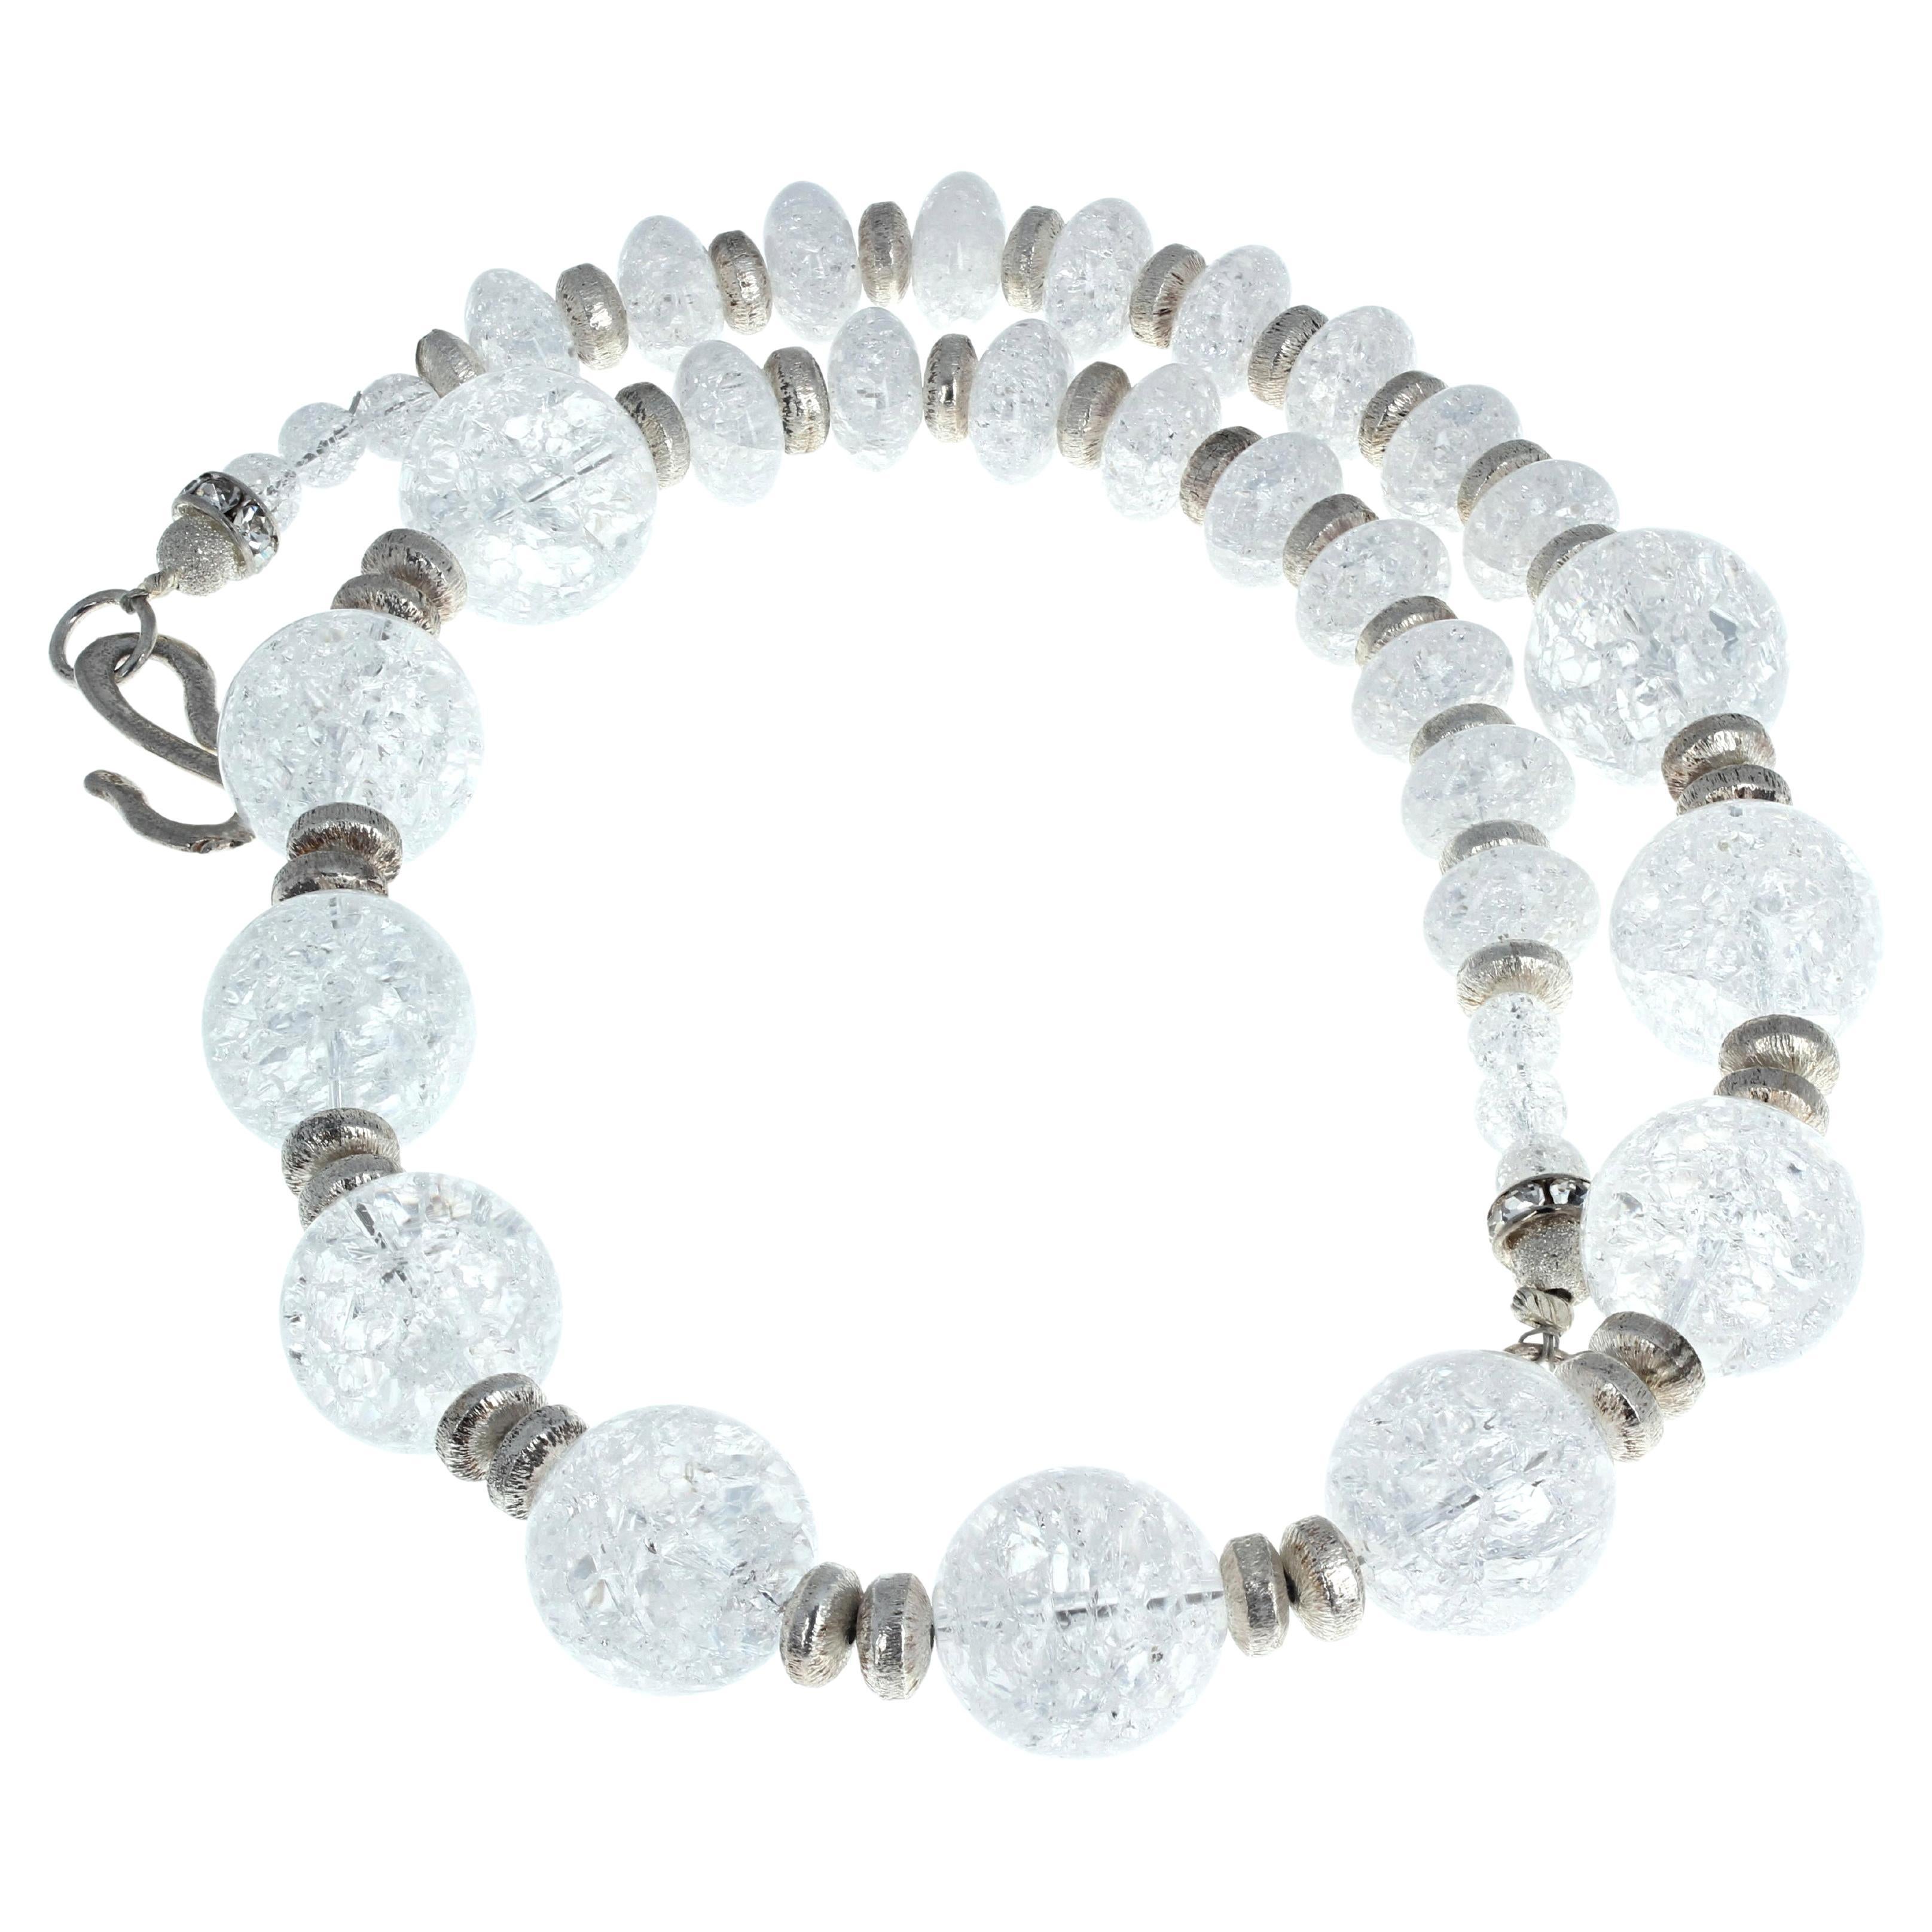 Fascinating beautiful elegant huge natural white Quartz 21 inch long necklace enhanced with lovely polished shining silver rondels.  The largest round Quartz are 18 1/2mm and the smaller ones are approximately 12 1/2 mm.  The clasp is a silver easy